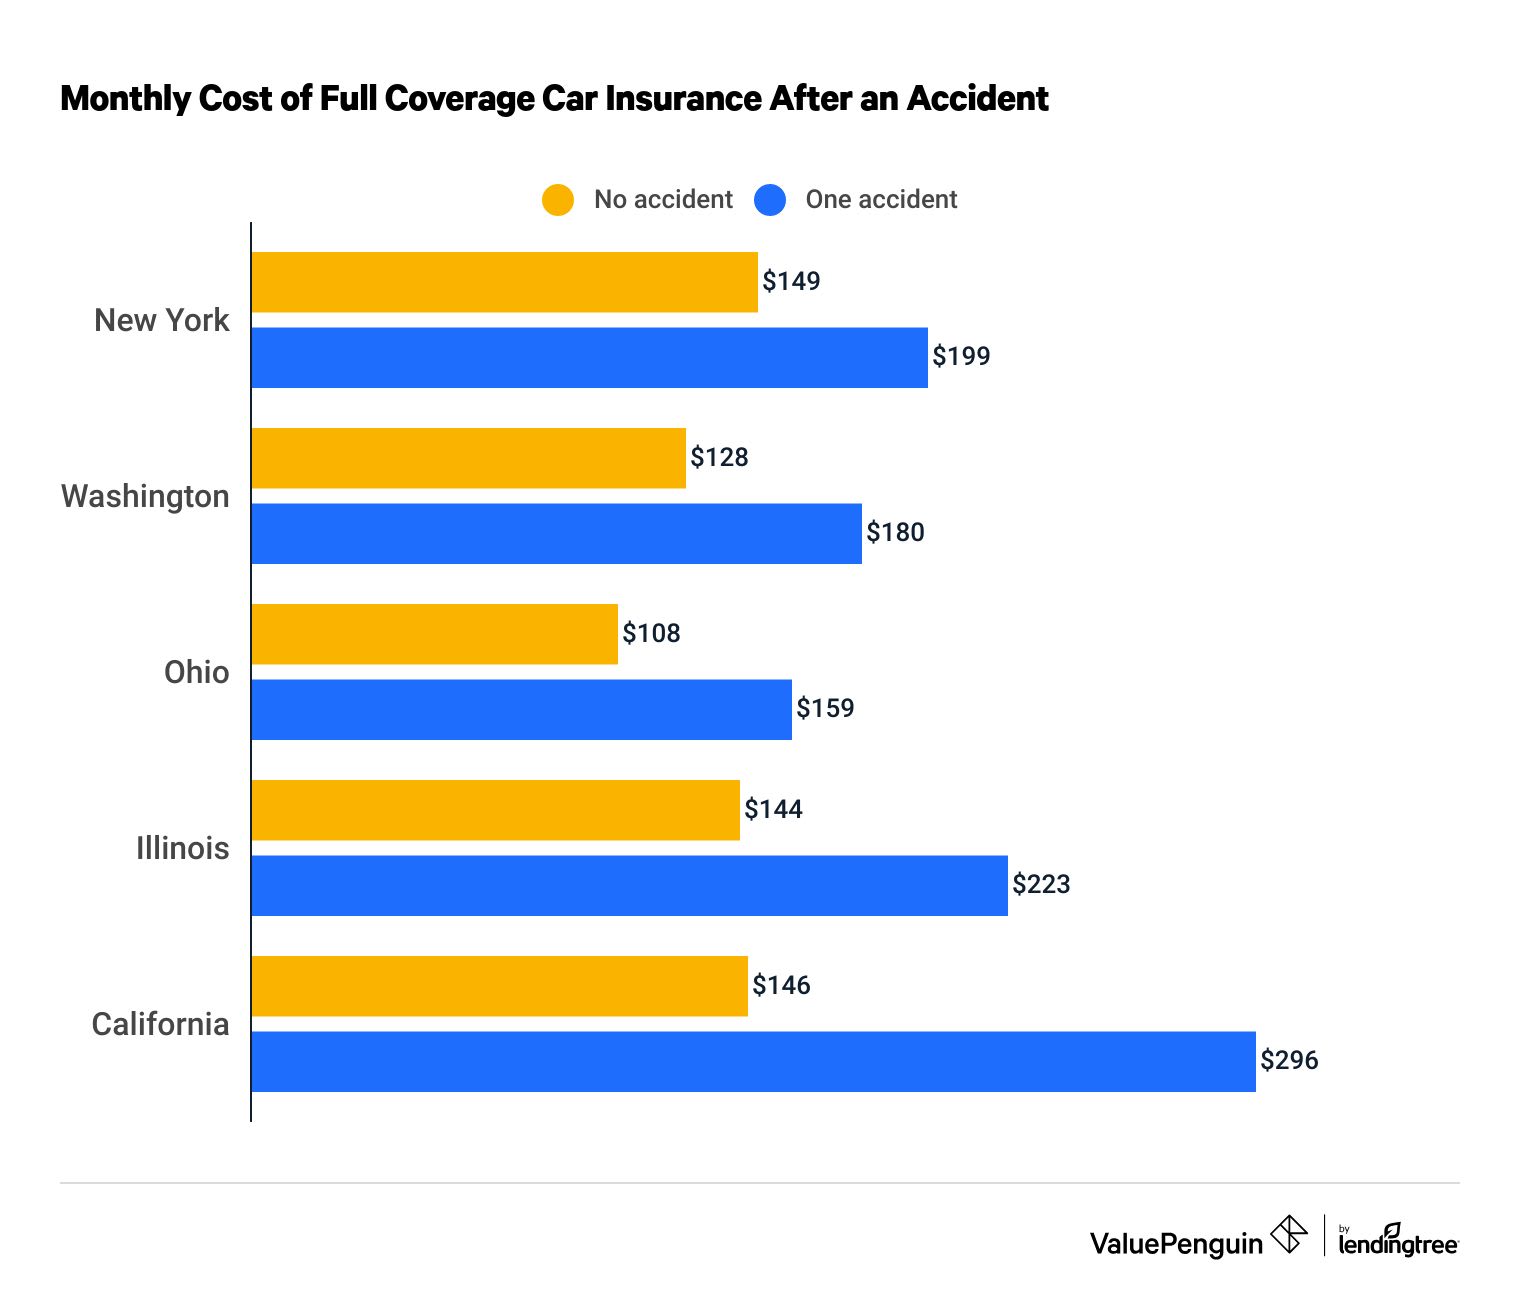 How Much Does Car Insurance Premium Go Up After Accident?